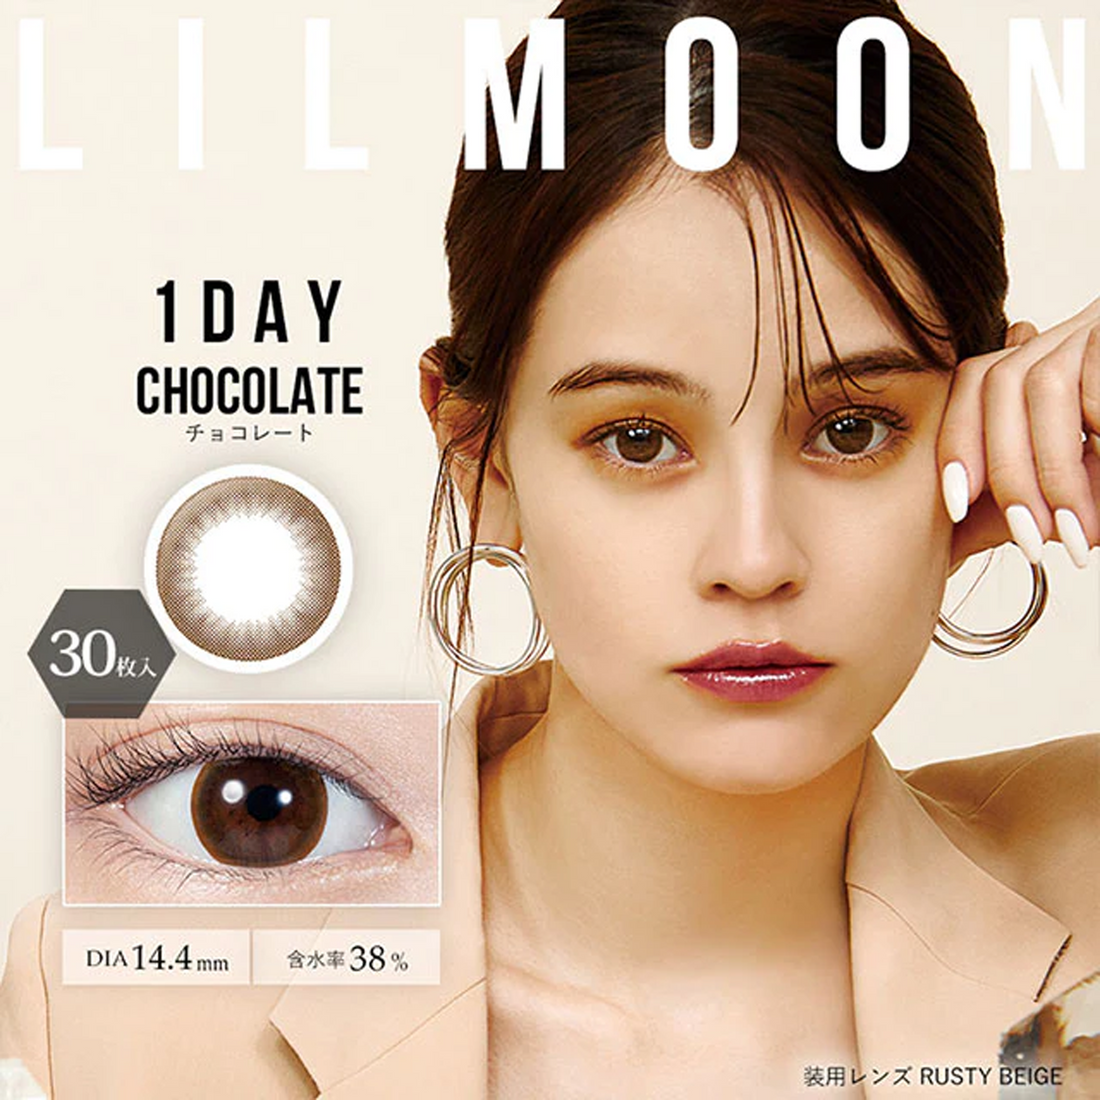 LIL MOON 1Day Contact Lenses-Chocolate 10pcs